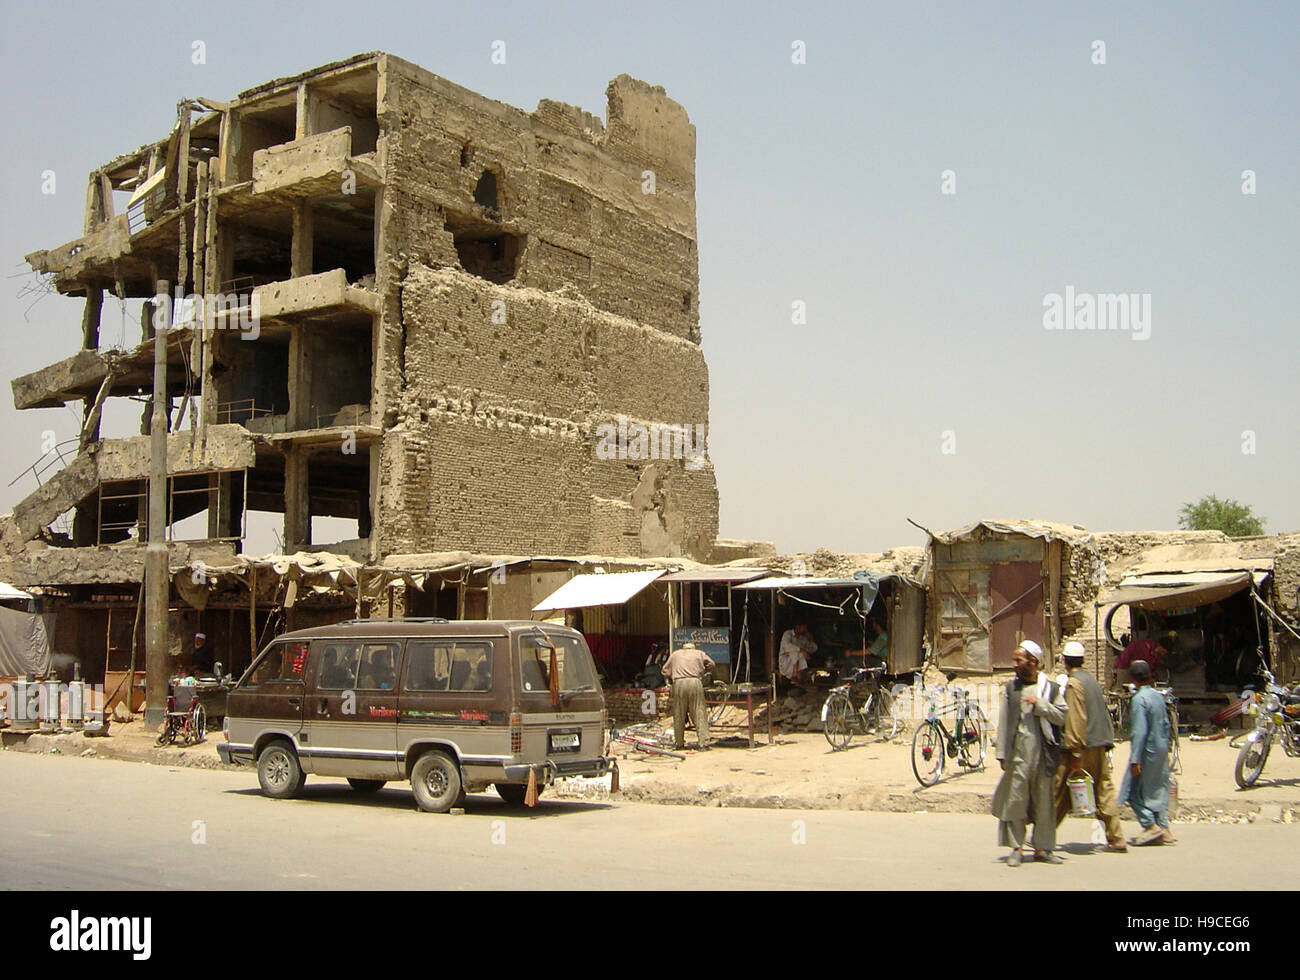 29th May 2004 A typical street scene in Kabul, Afghanistan: life goes on next to bomb-damaged buildings. Stock Photo